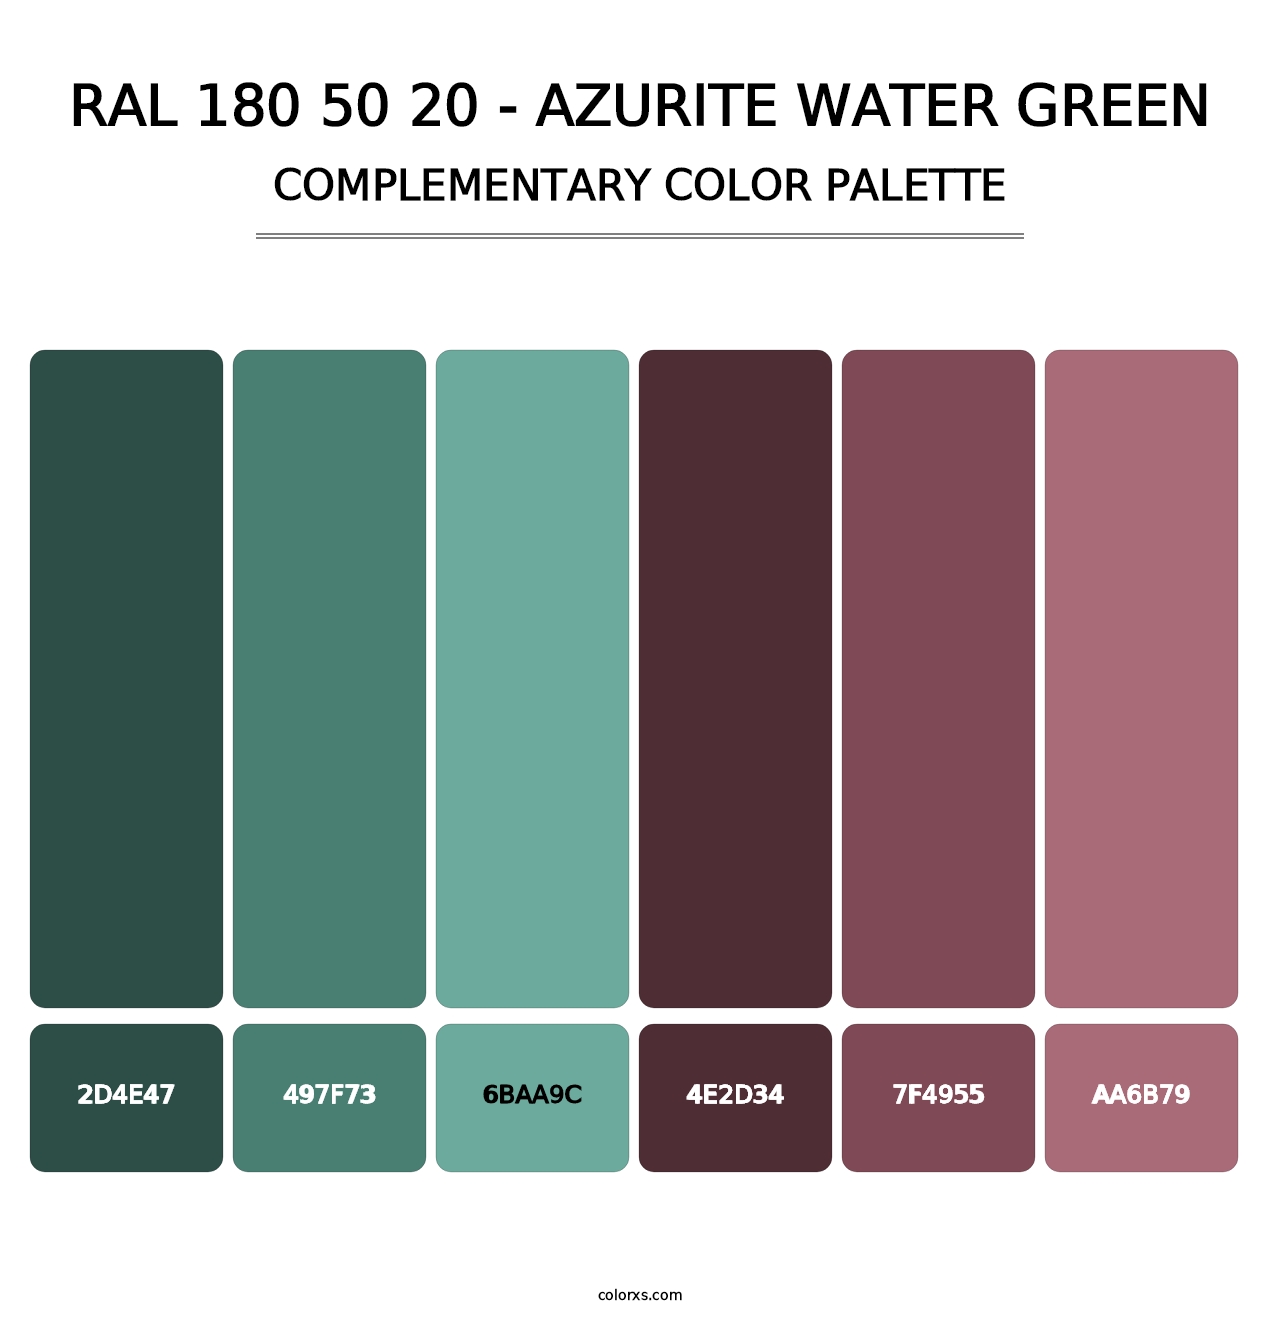 RAL 180 50 20 - Azurite Water Green - Complementary Color Palette